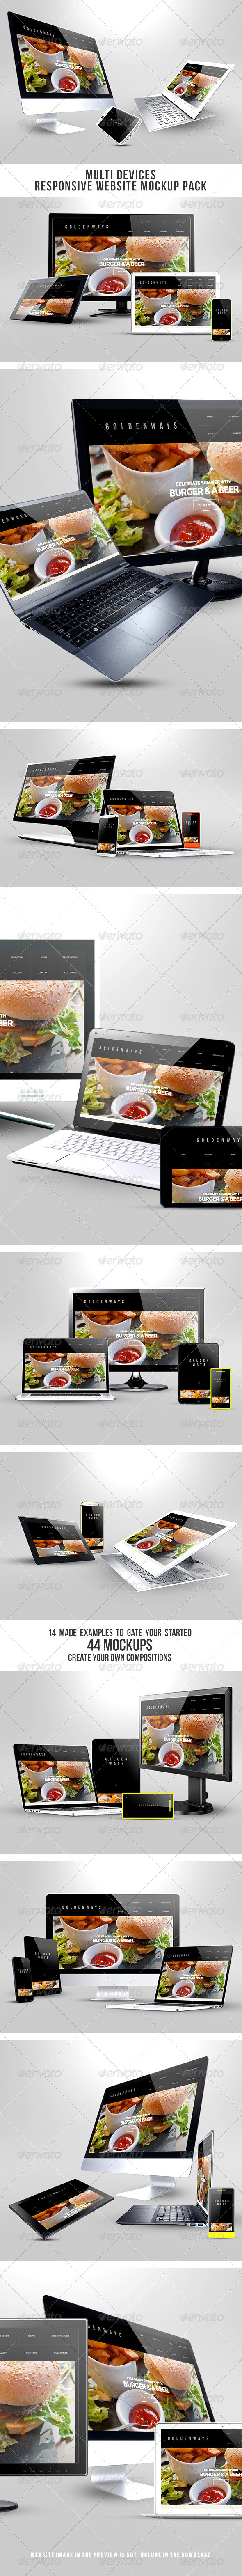 Multi devices responsive website mockup pack preview